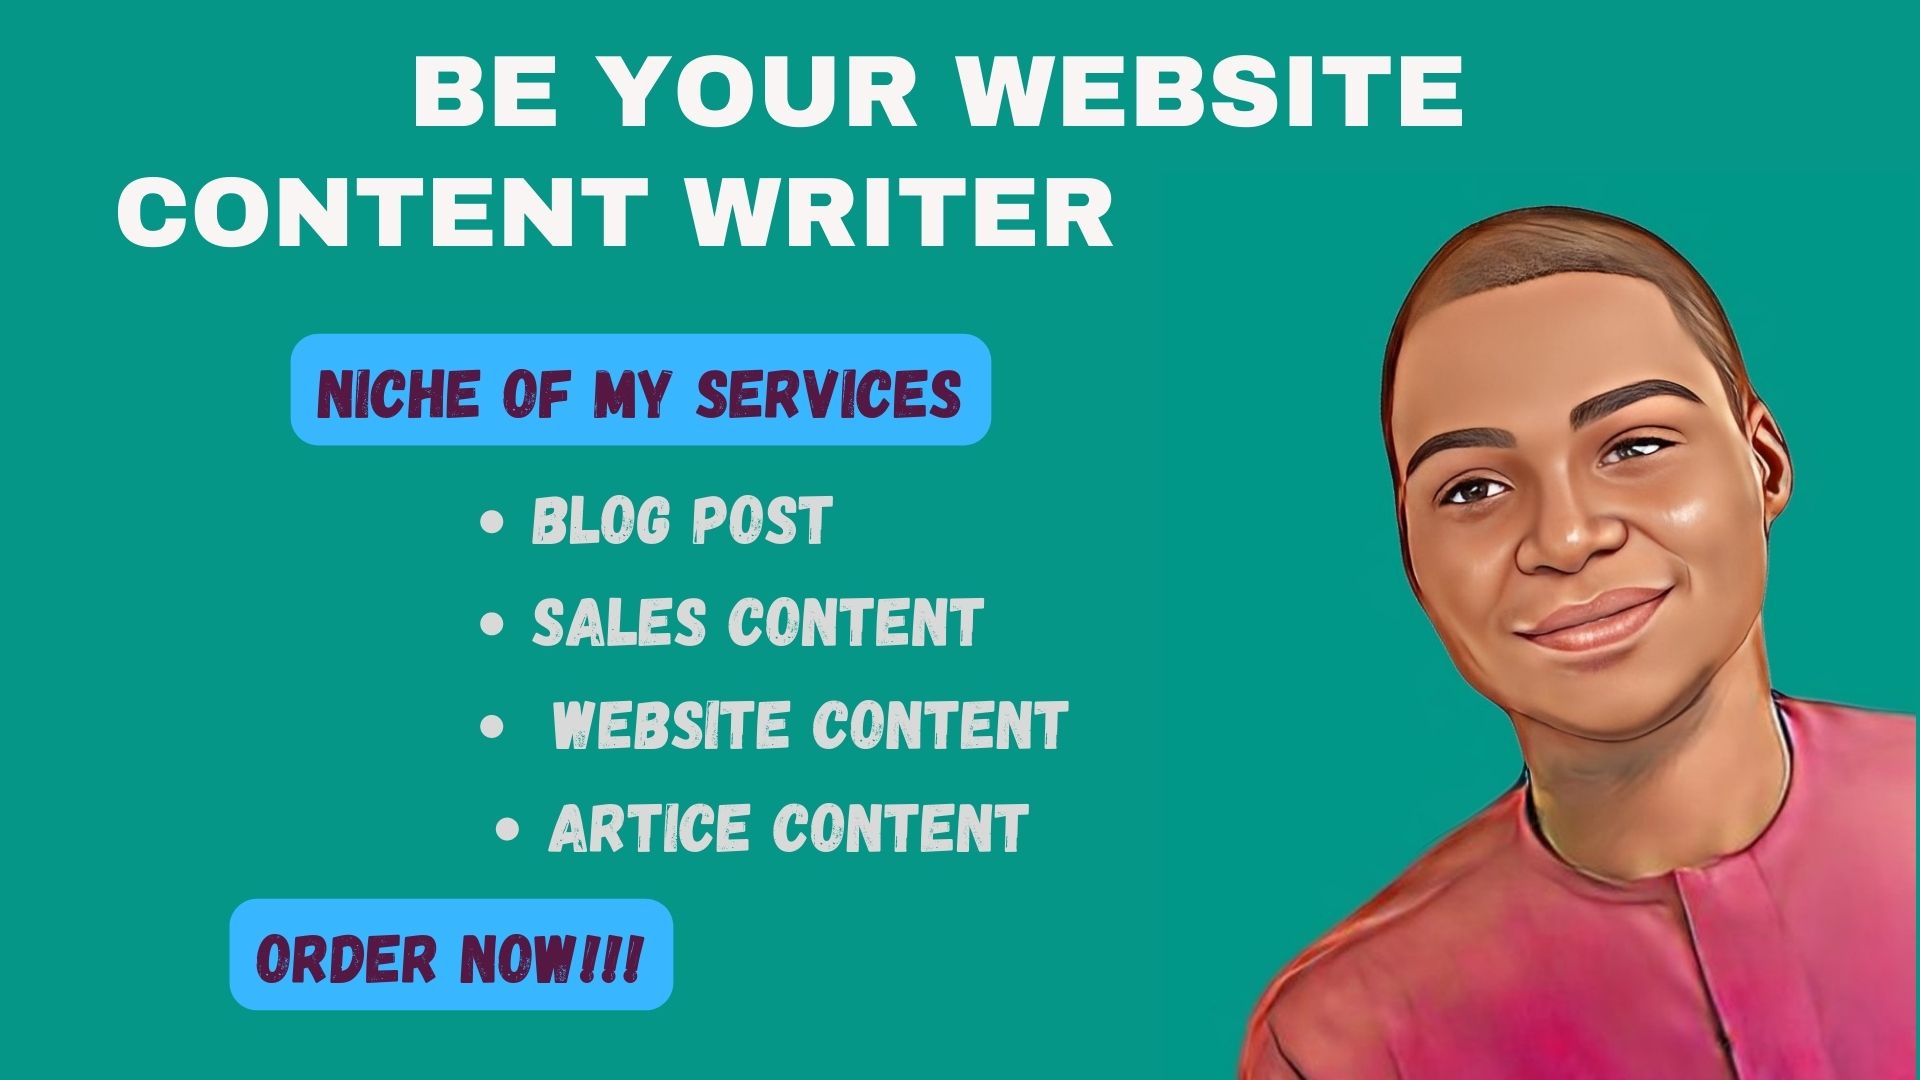 I will write engaging clear article and website content to increase your sales